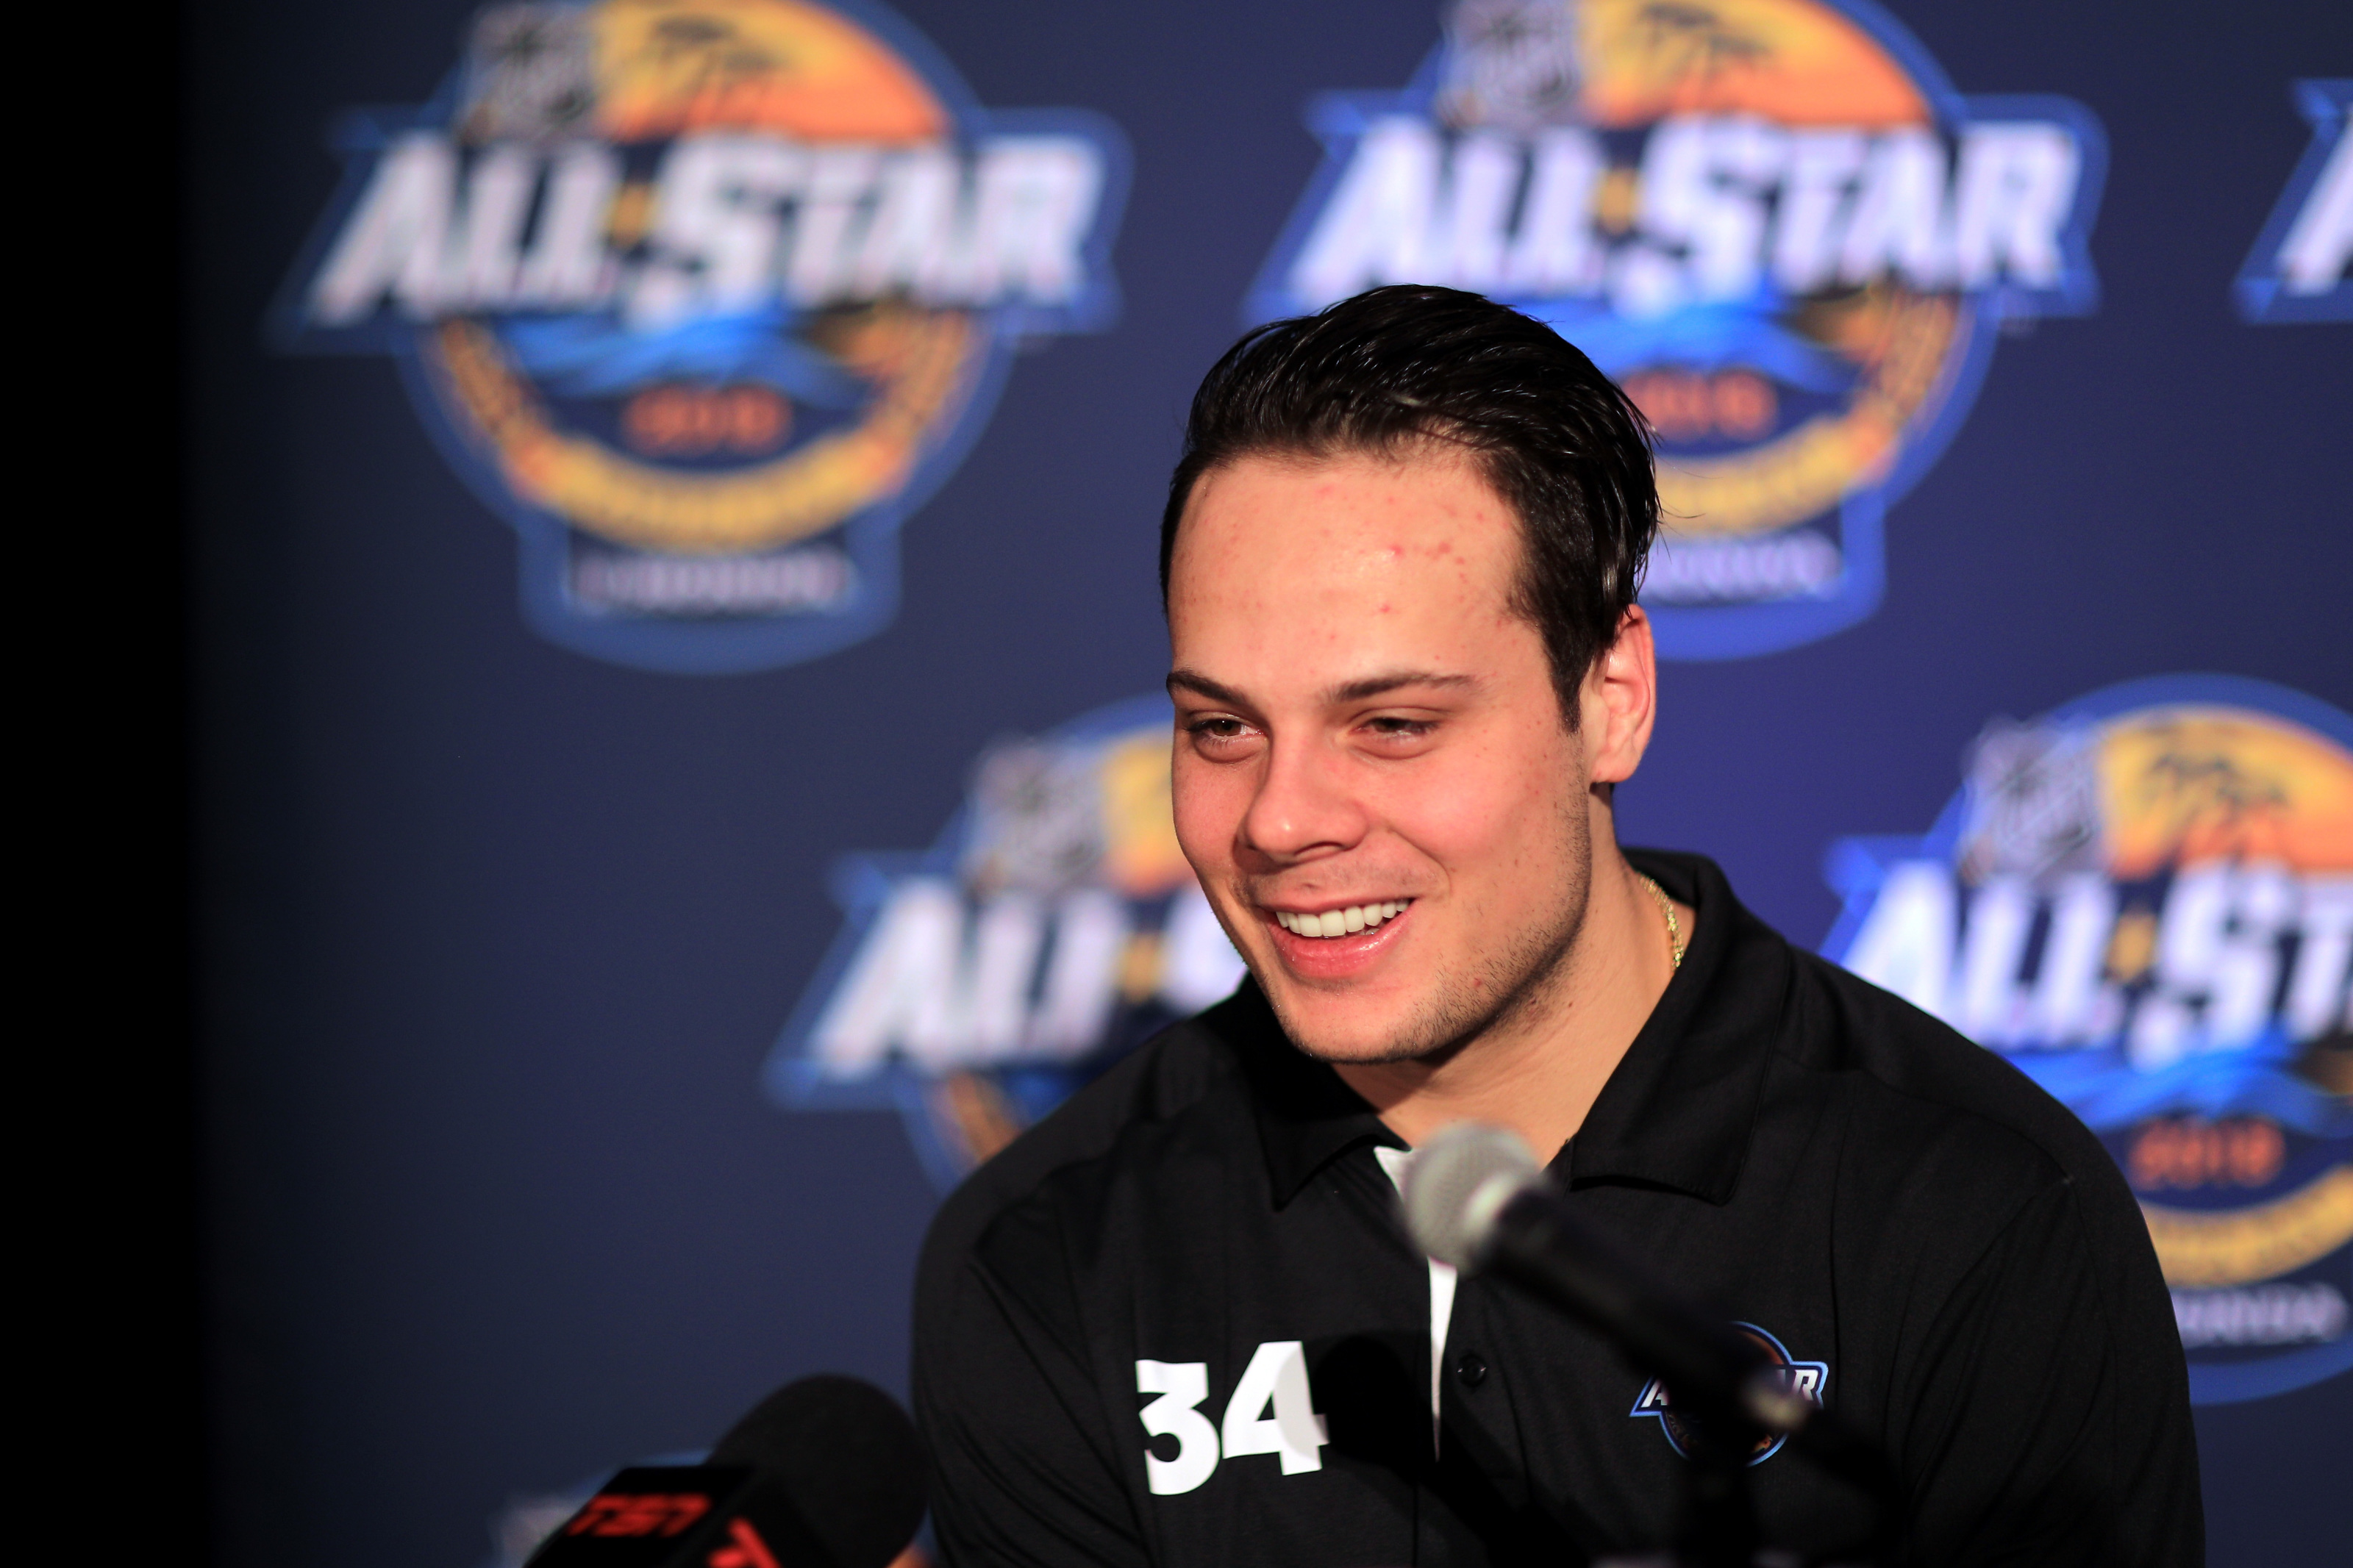 Auston Matthews signs contract extension with Toronto Maple Leafs